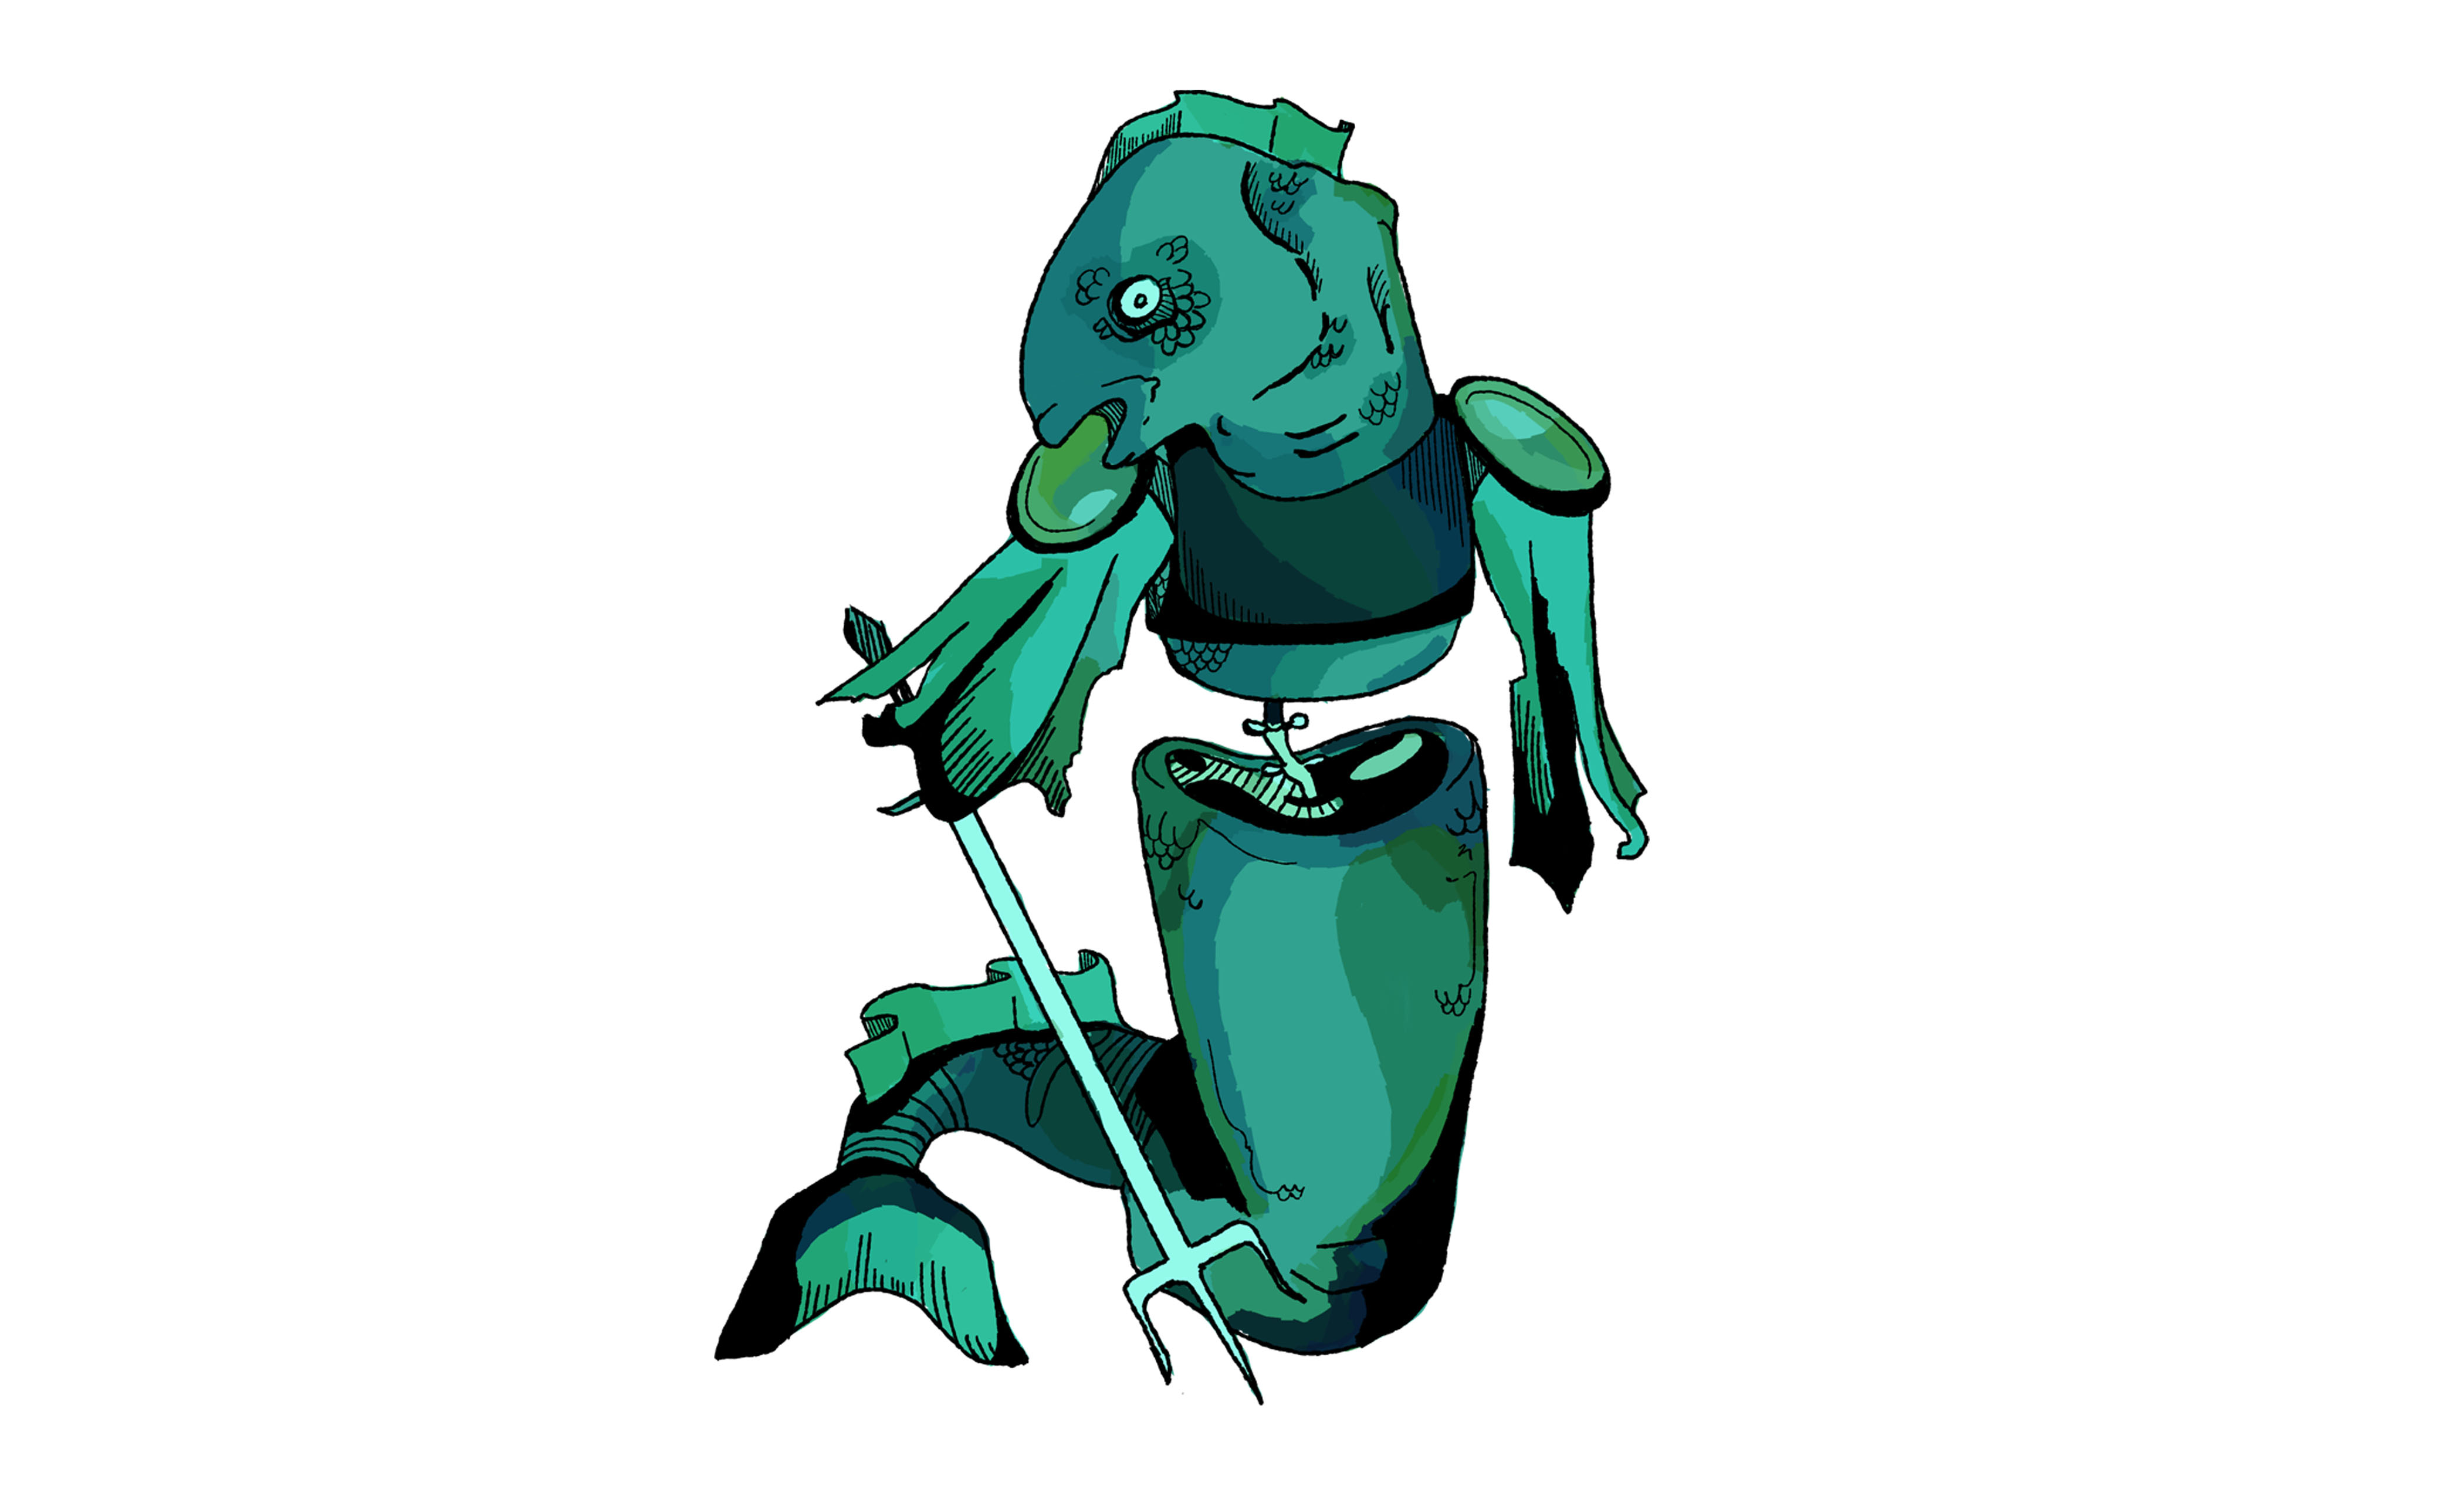 "Fish Knight" /  "Fish Knight" Concept of a video game enemy, created using Adobe Photoshop